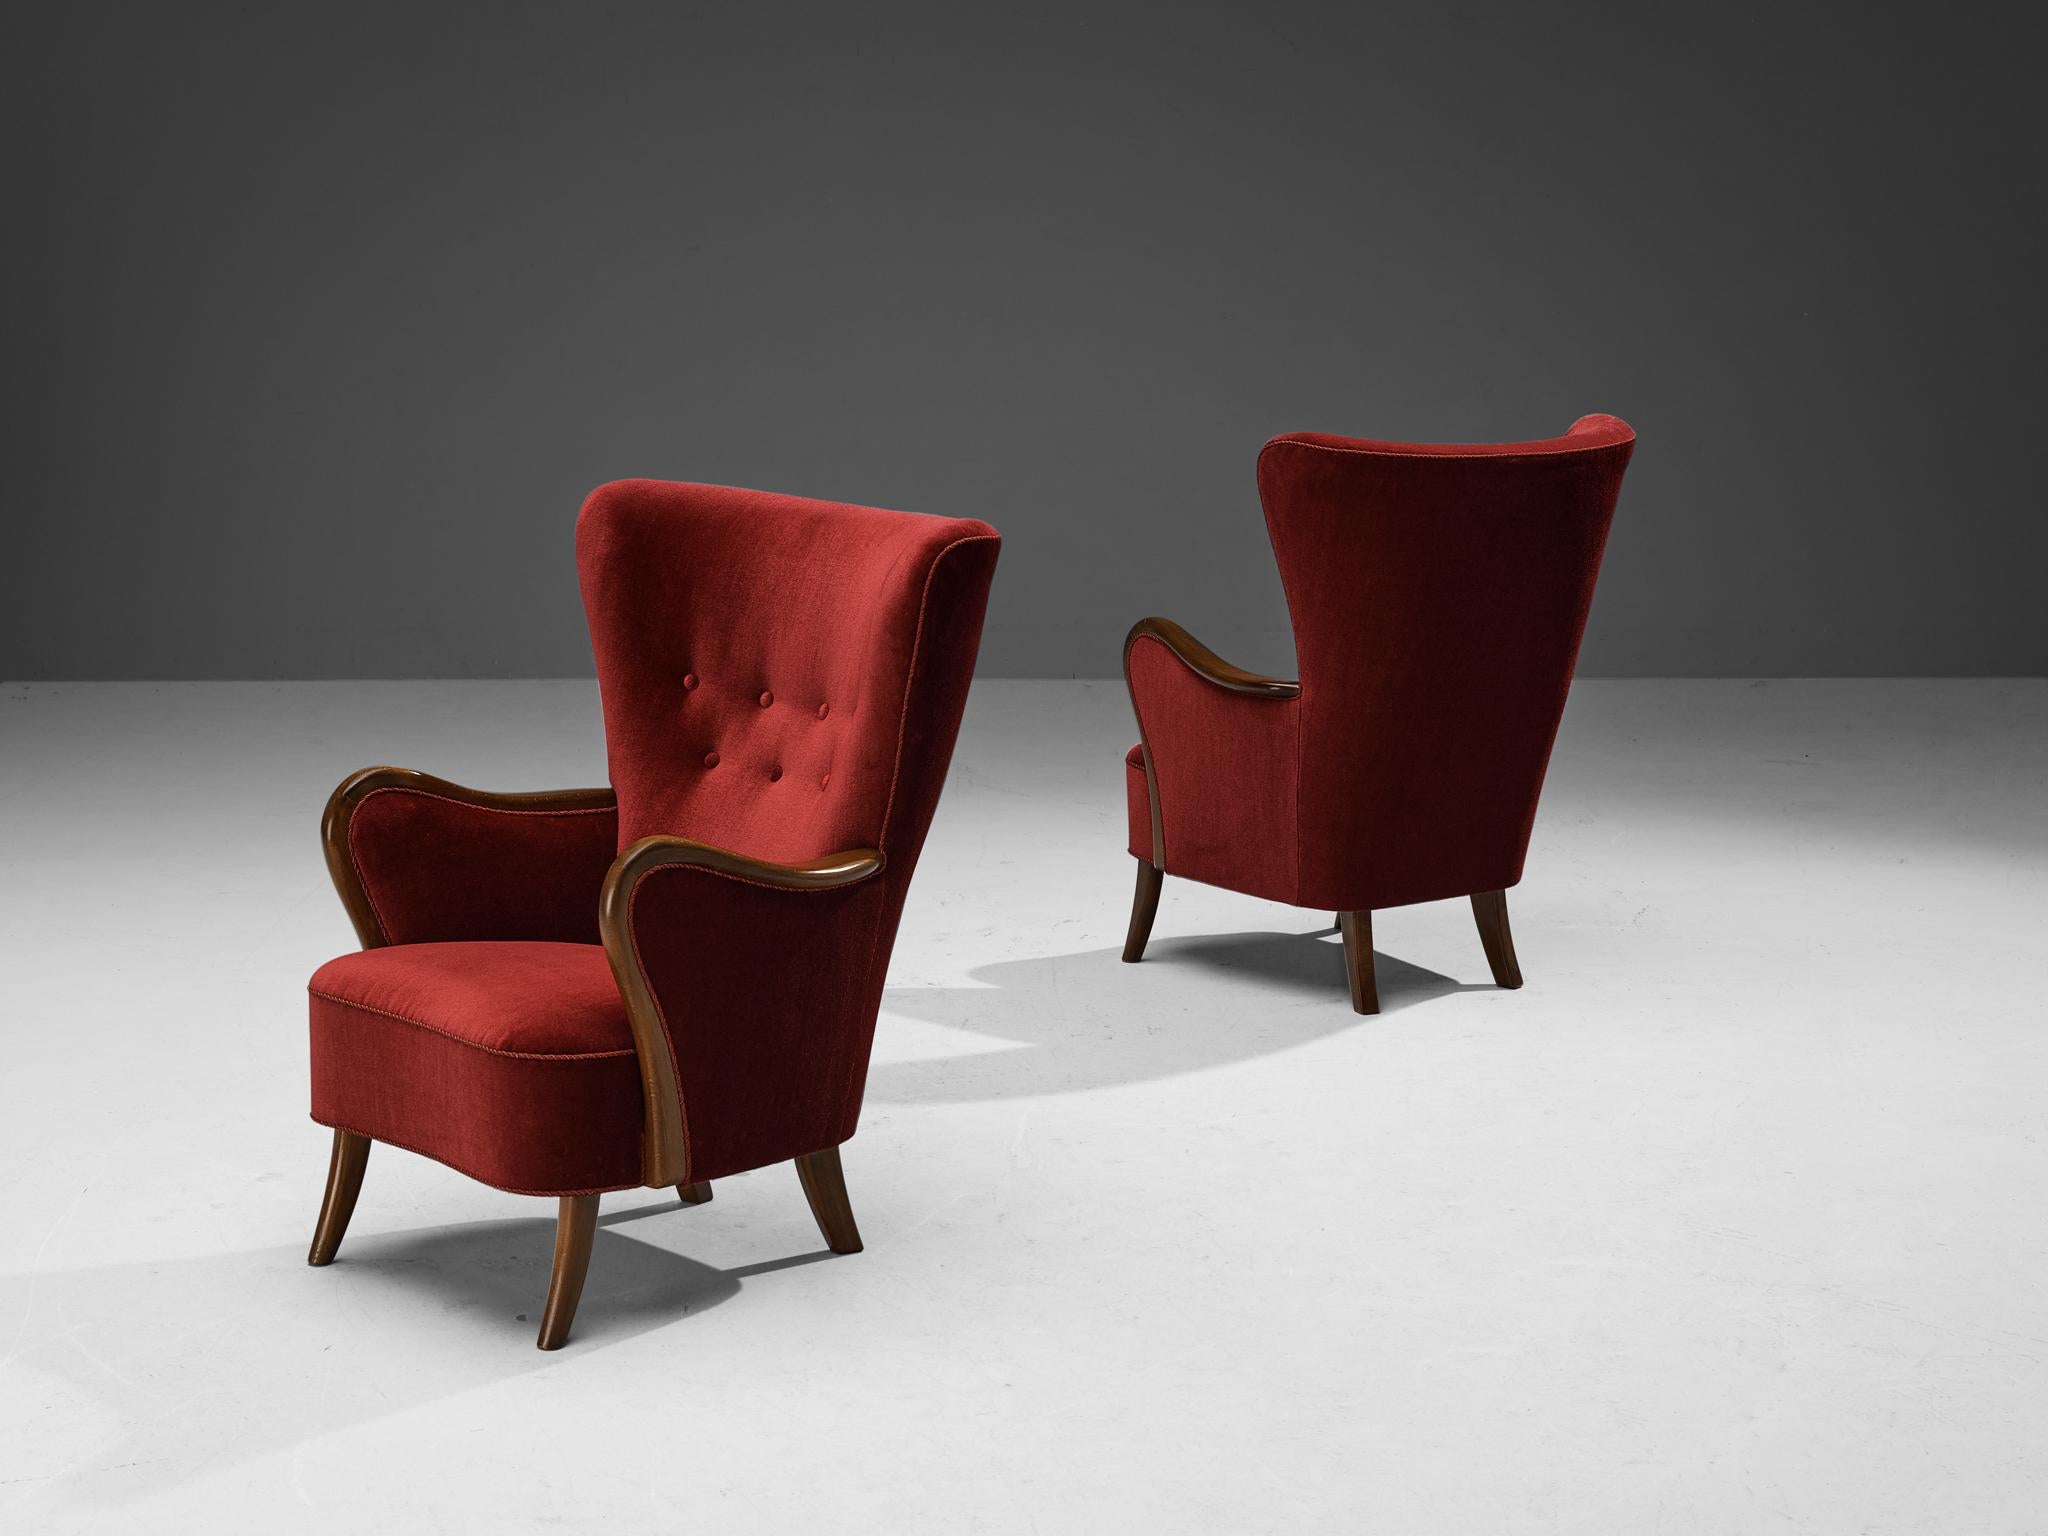 Axel Christensen, pair of lounge chairs, velvet, stained beech, Denmark, 1960s

These charming lounge chairs with their burgundy colored velour, soft edges and sturdy shapes, are typical for Danish design. The back develops in a modest winged